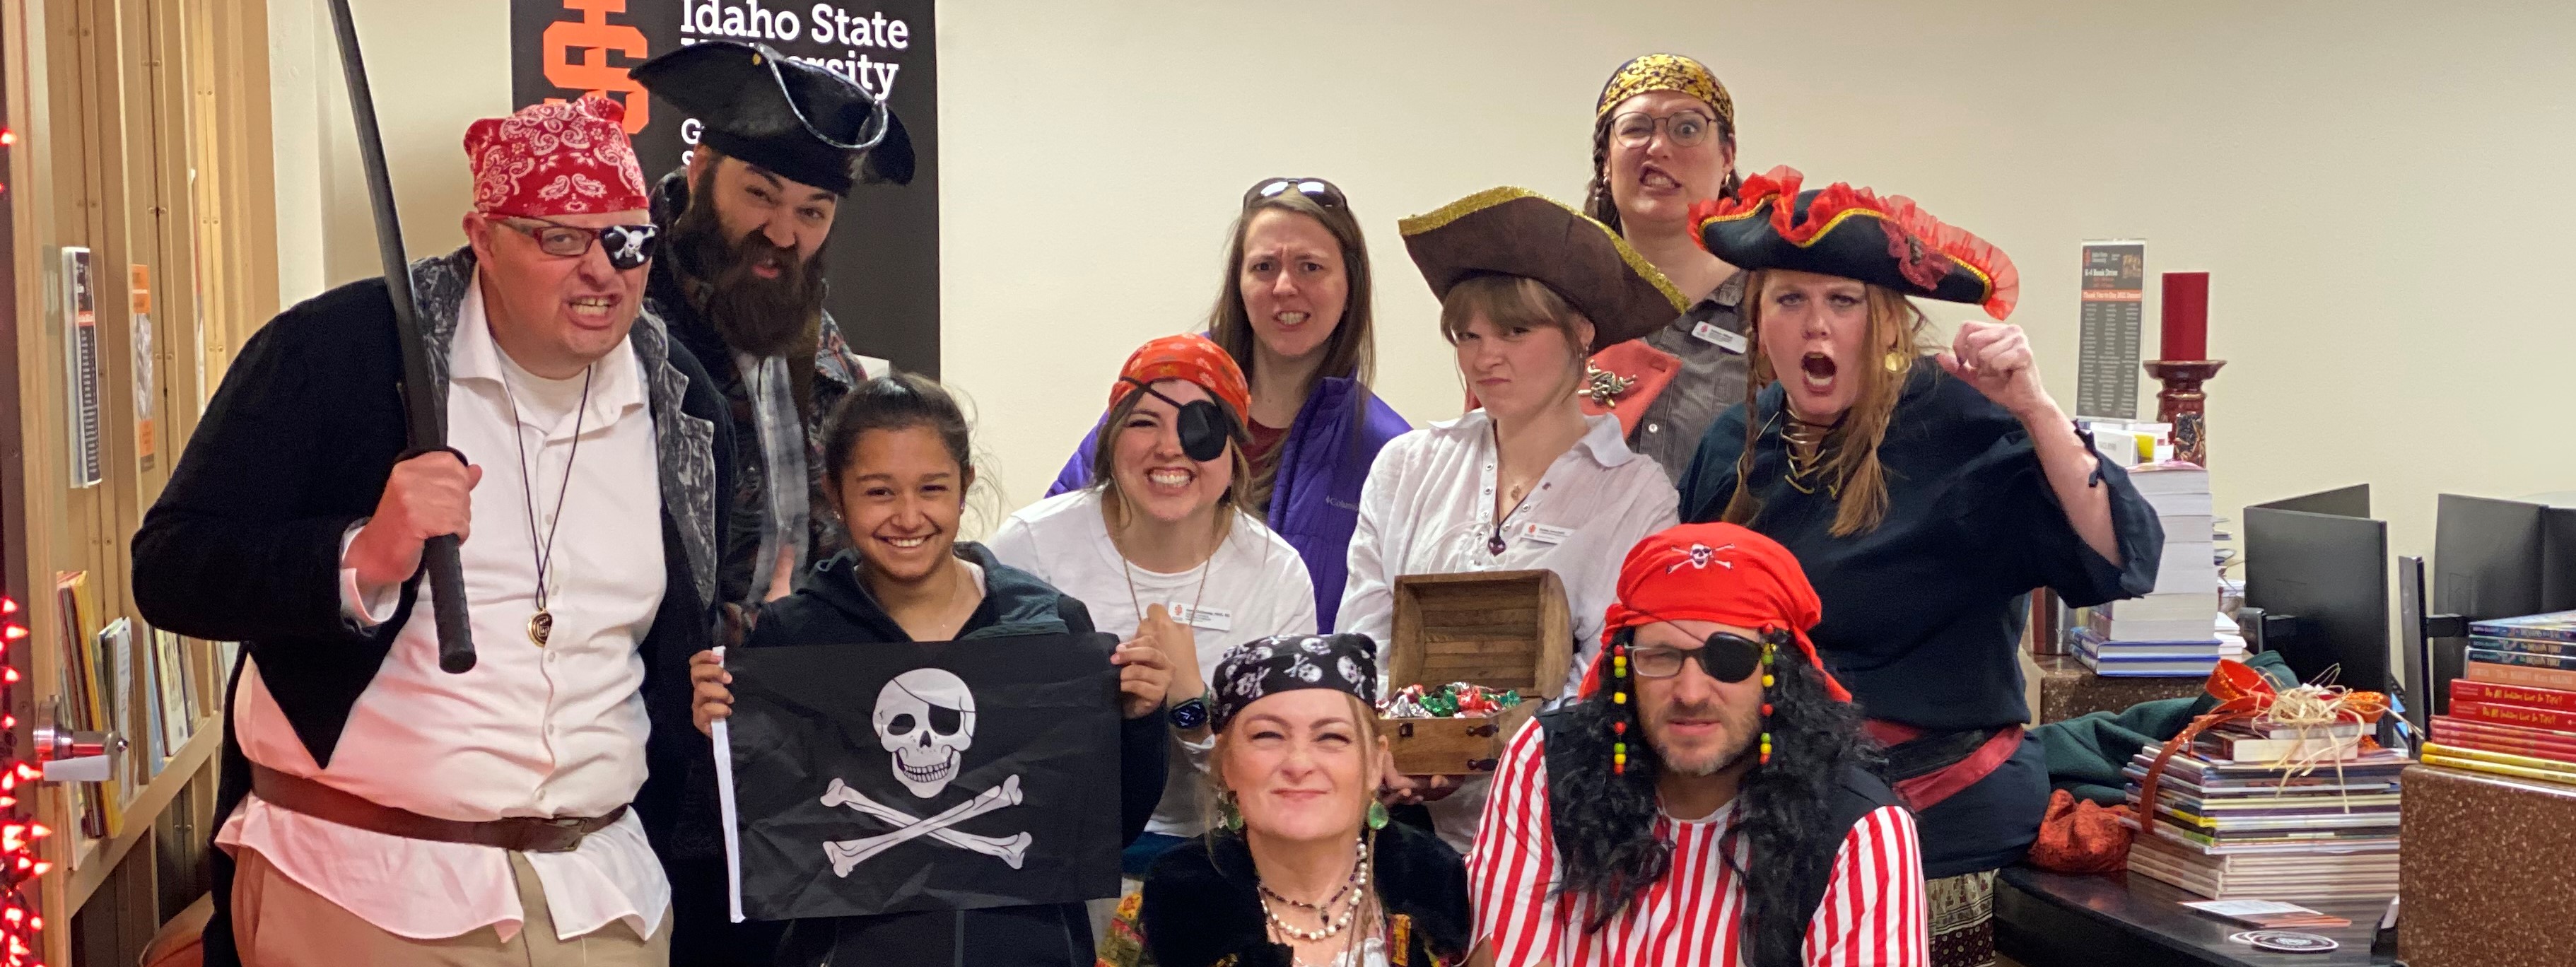 The graduate school team dressed as pirates for Halloween making grumpy faces